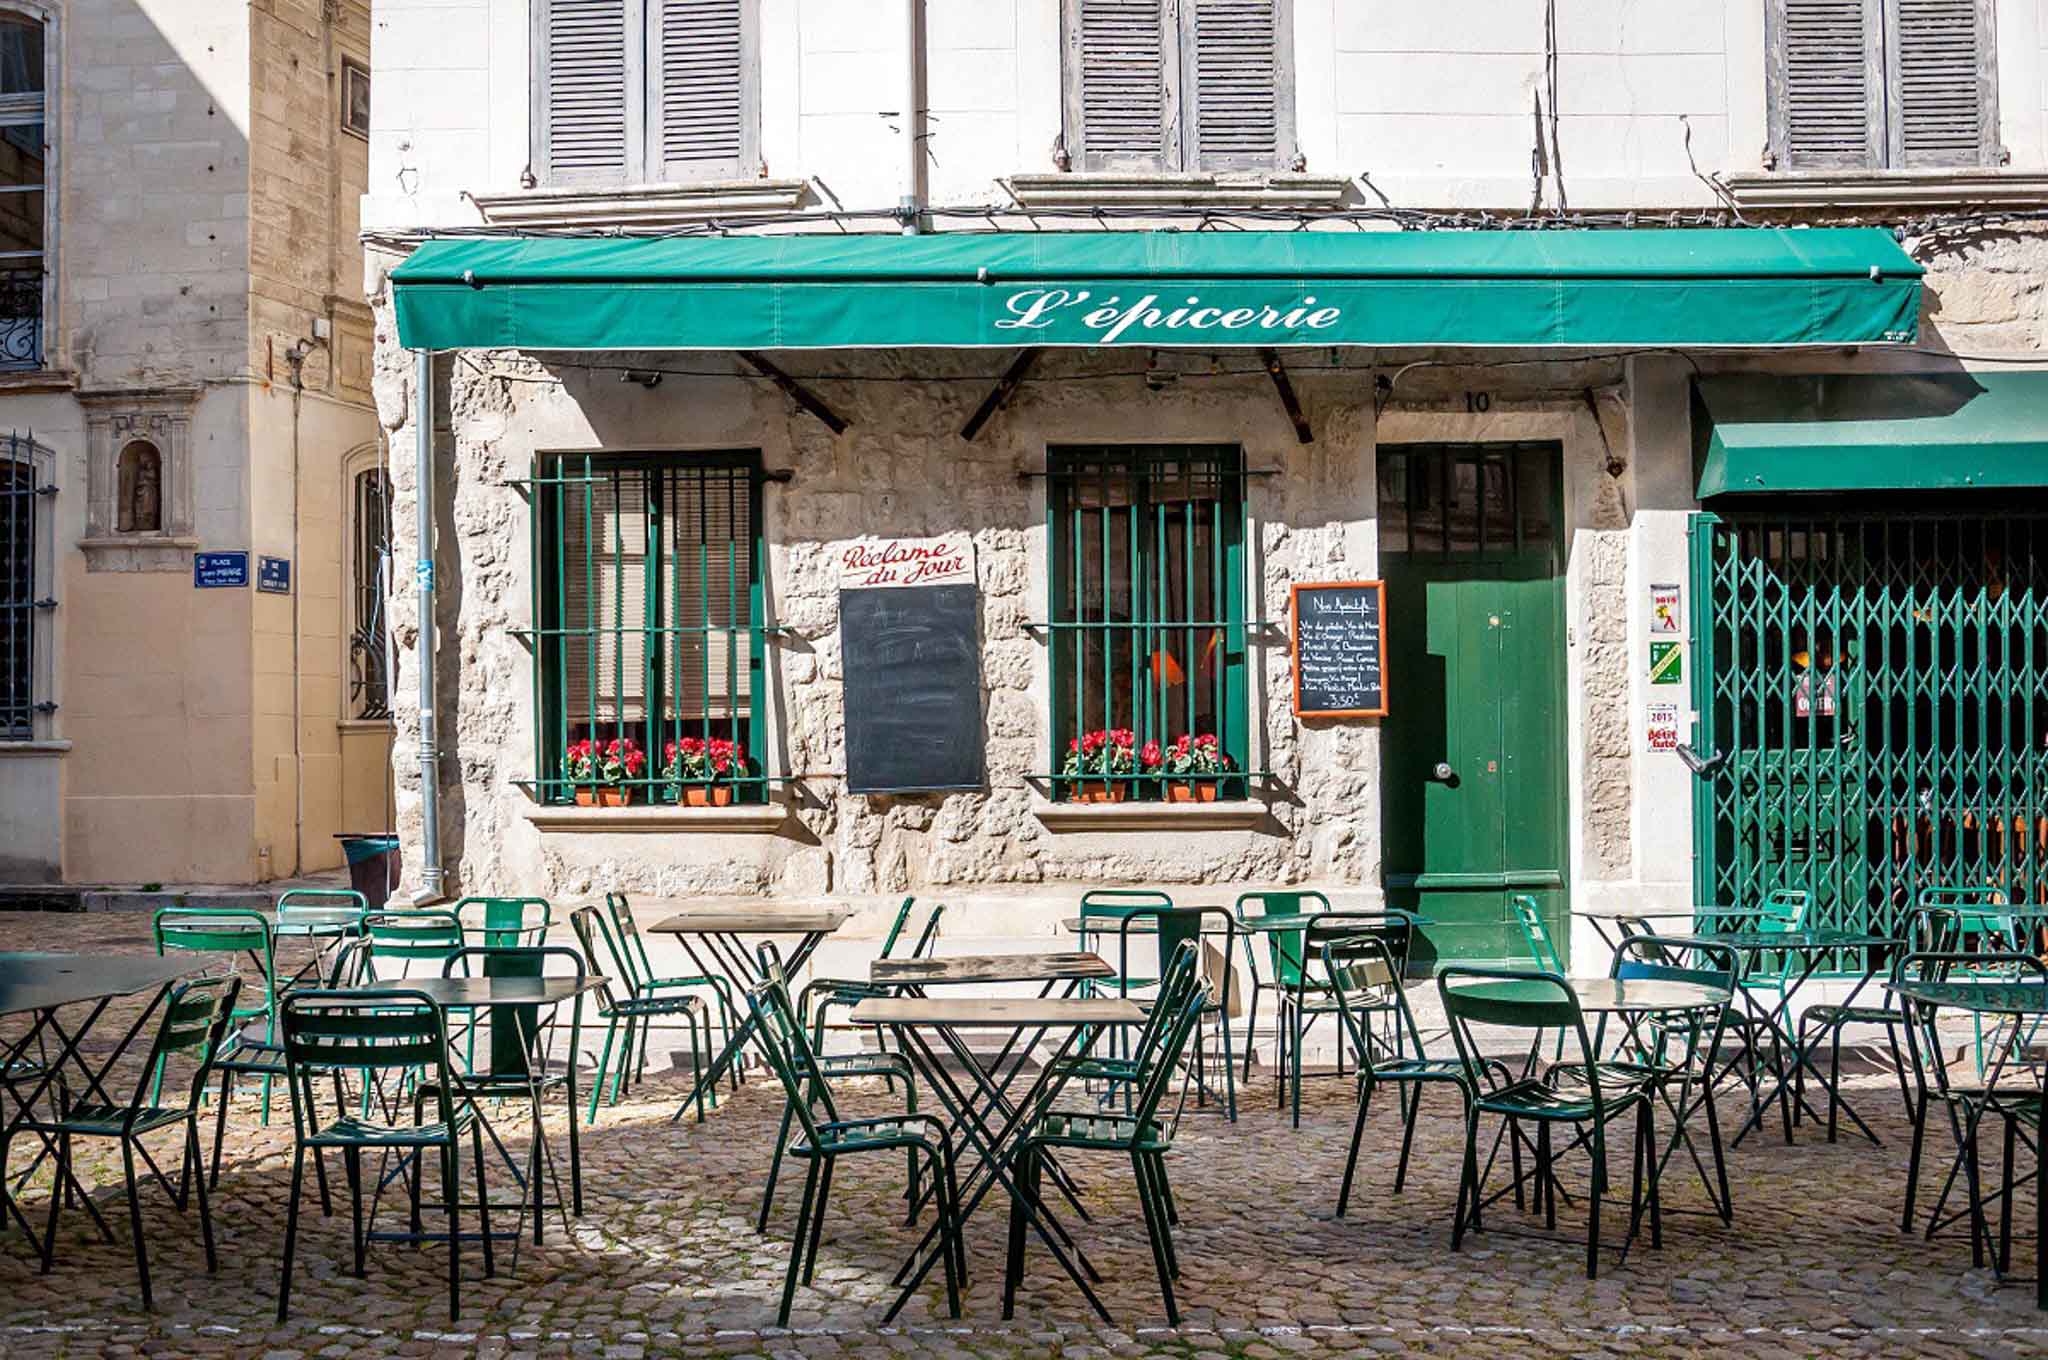 Cafe with green awning and chairs